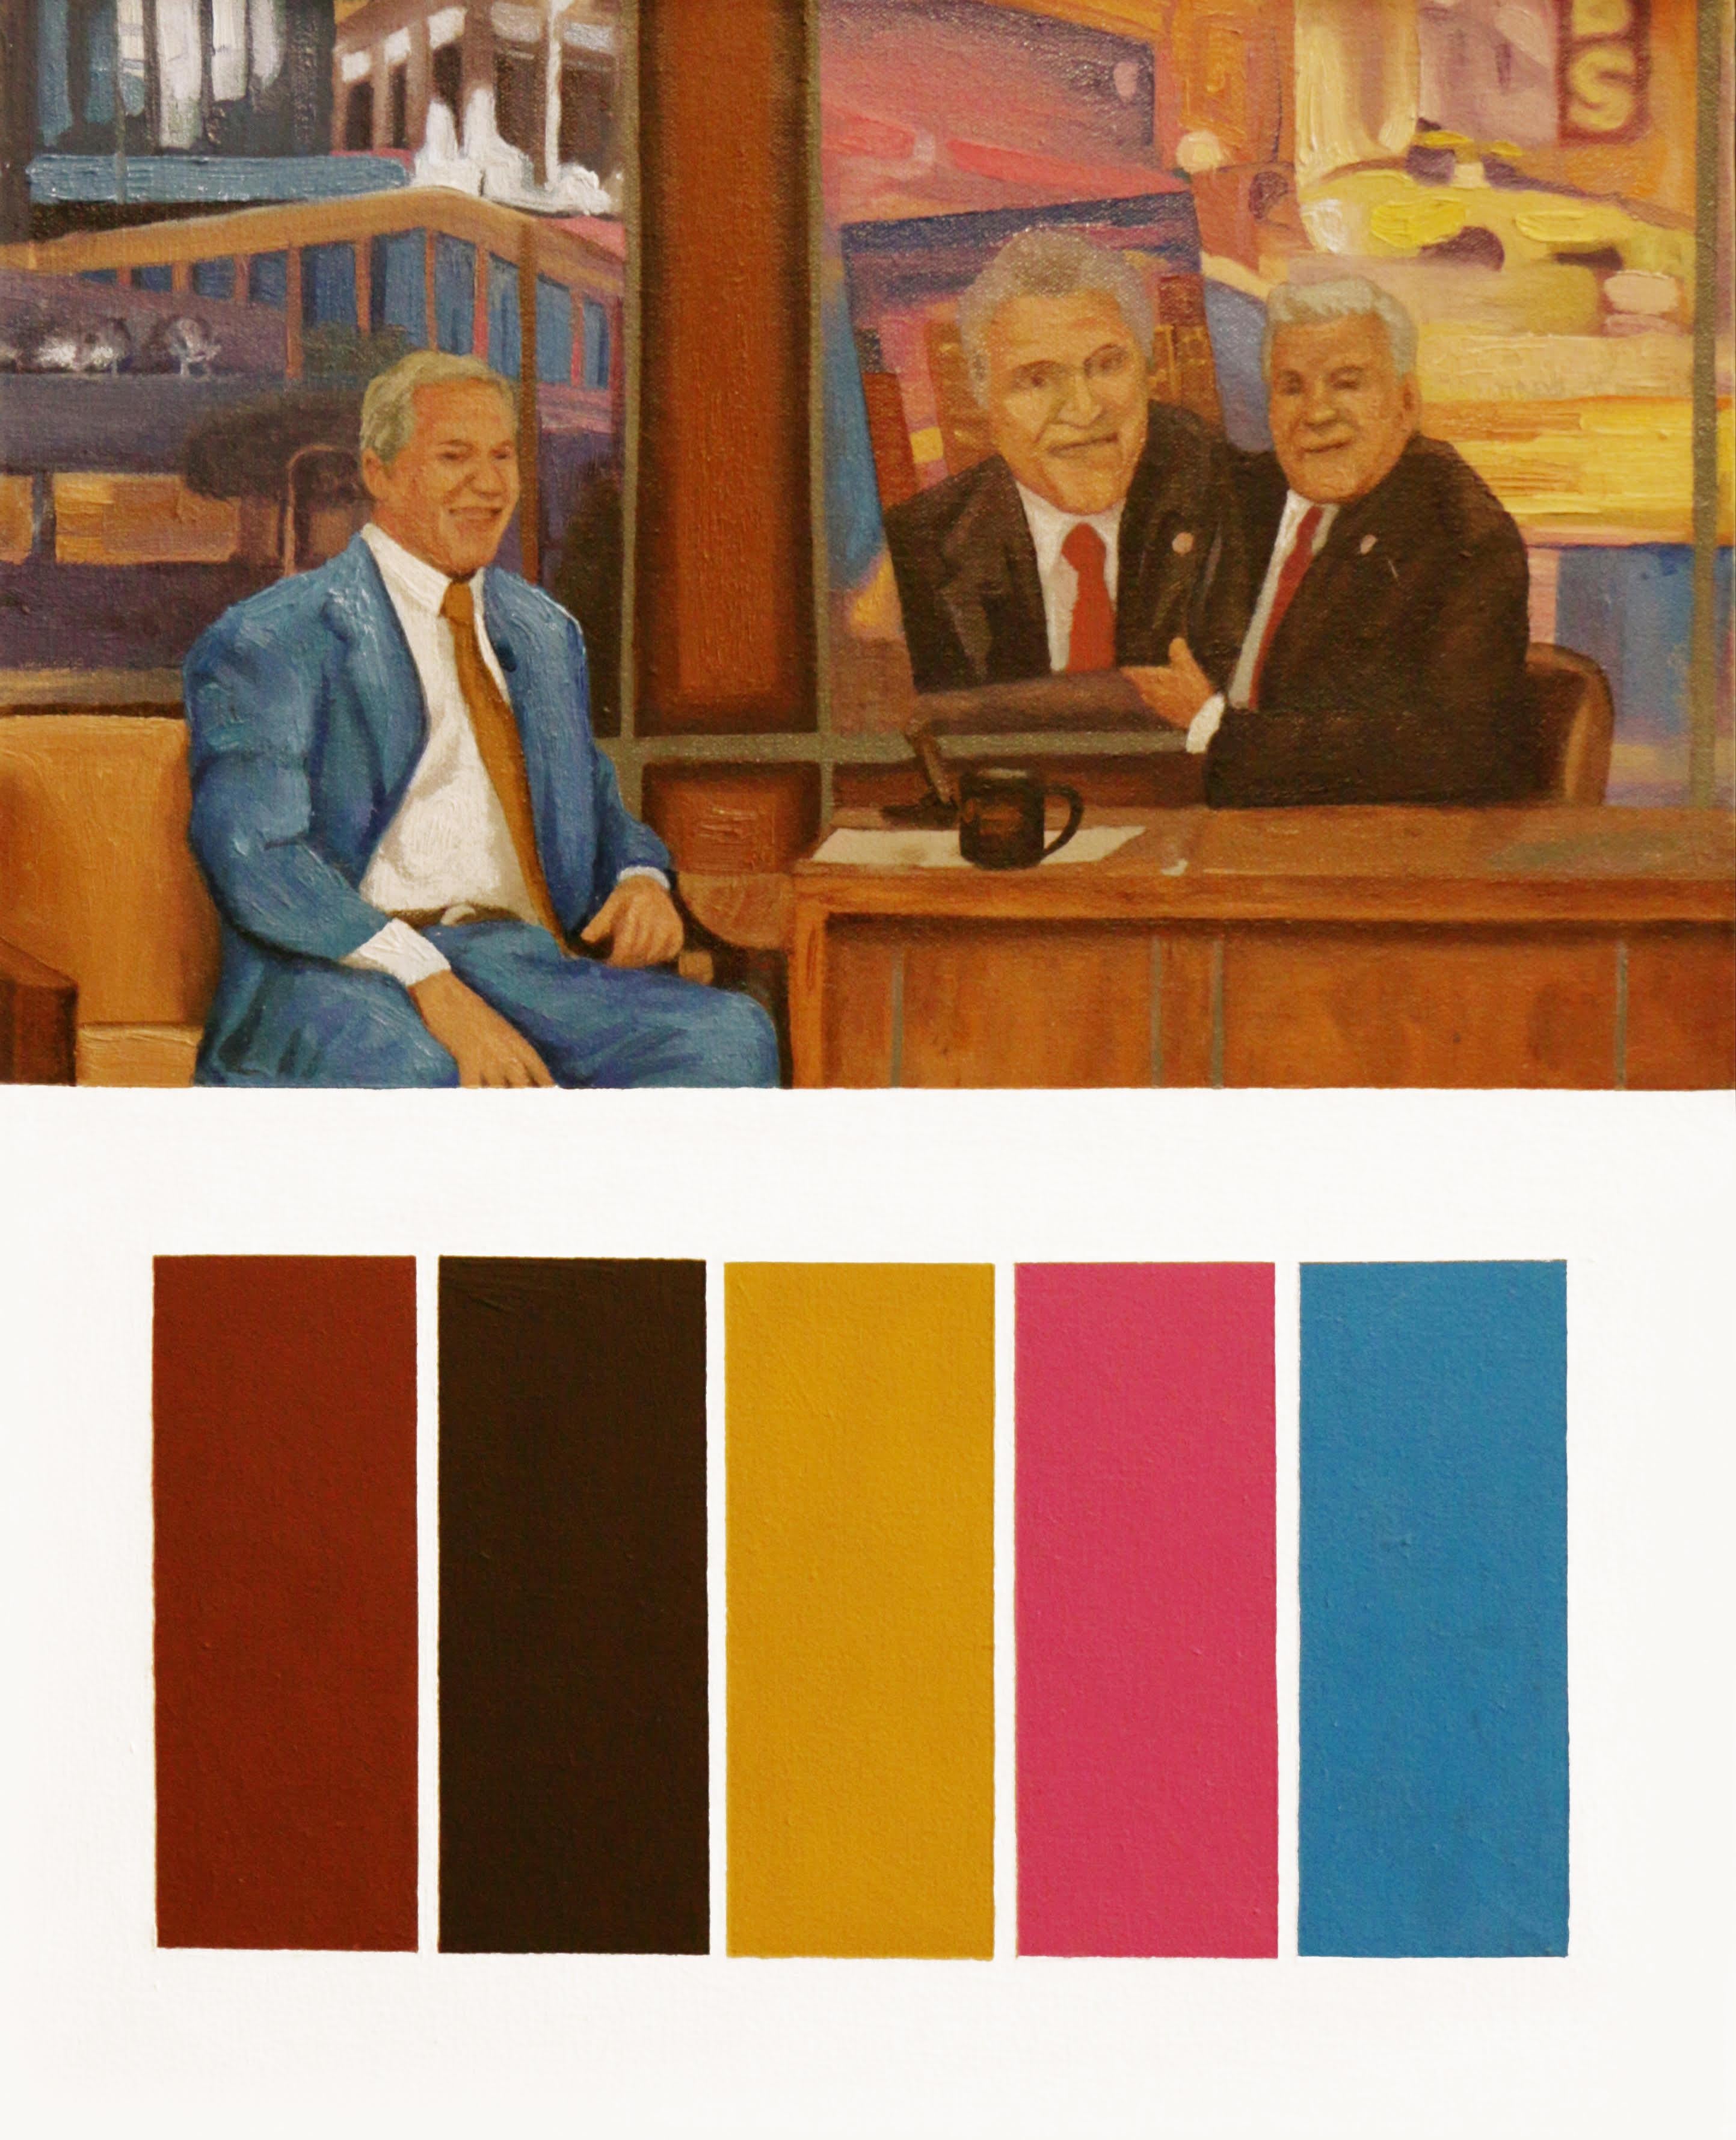 George W. Bush gifts Jay Leno a portrait of Jay Leno. Figurative Painting